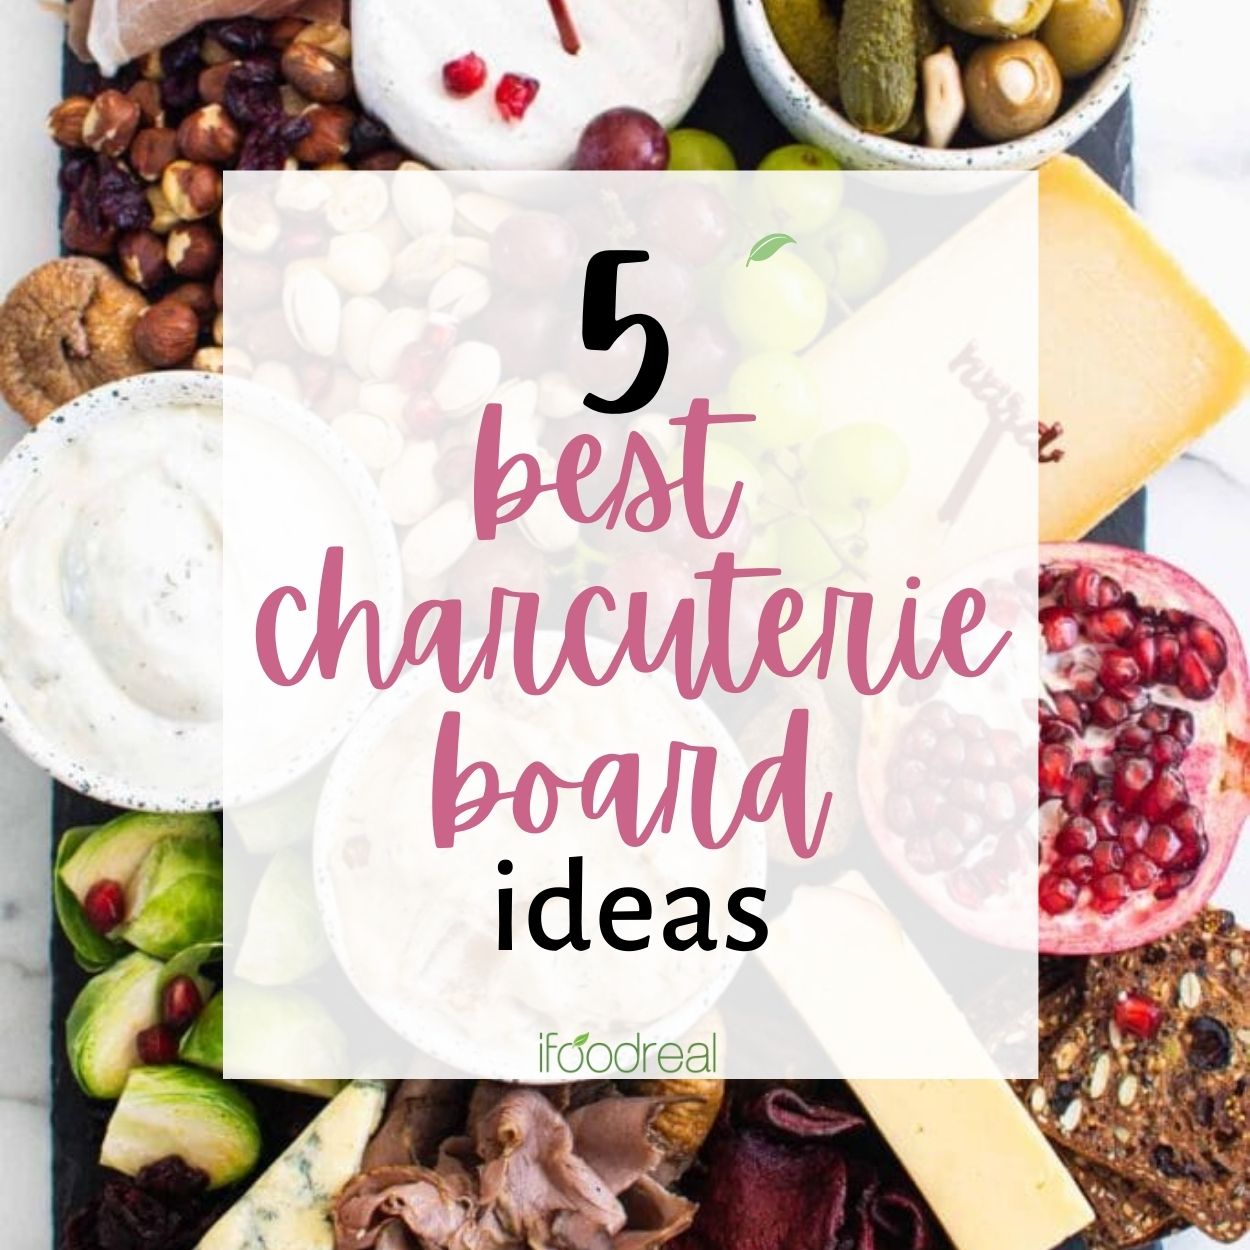 5 Best Charcuterie Board Ideas Simple and Easy! - iFoodReal.com